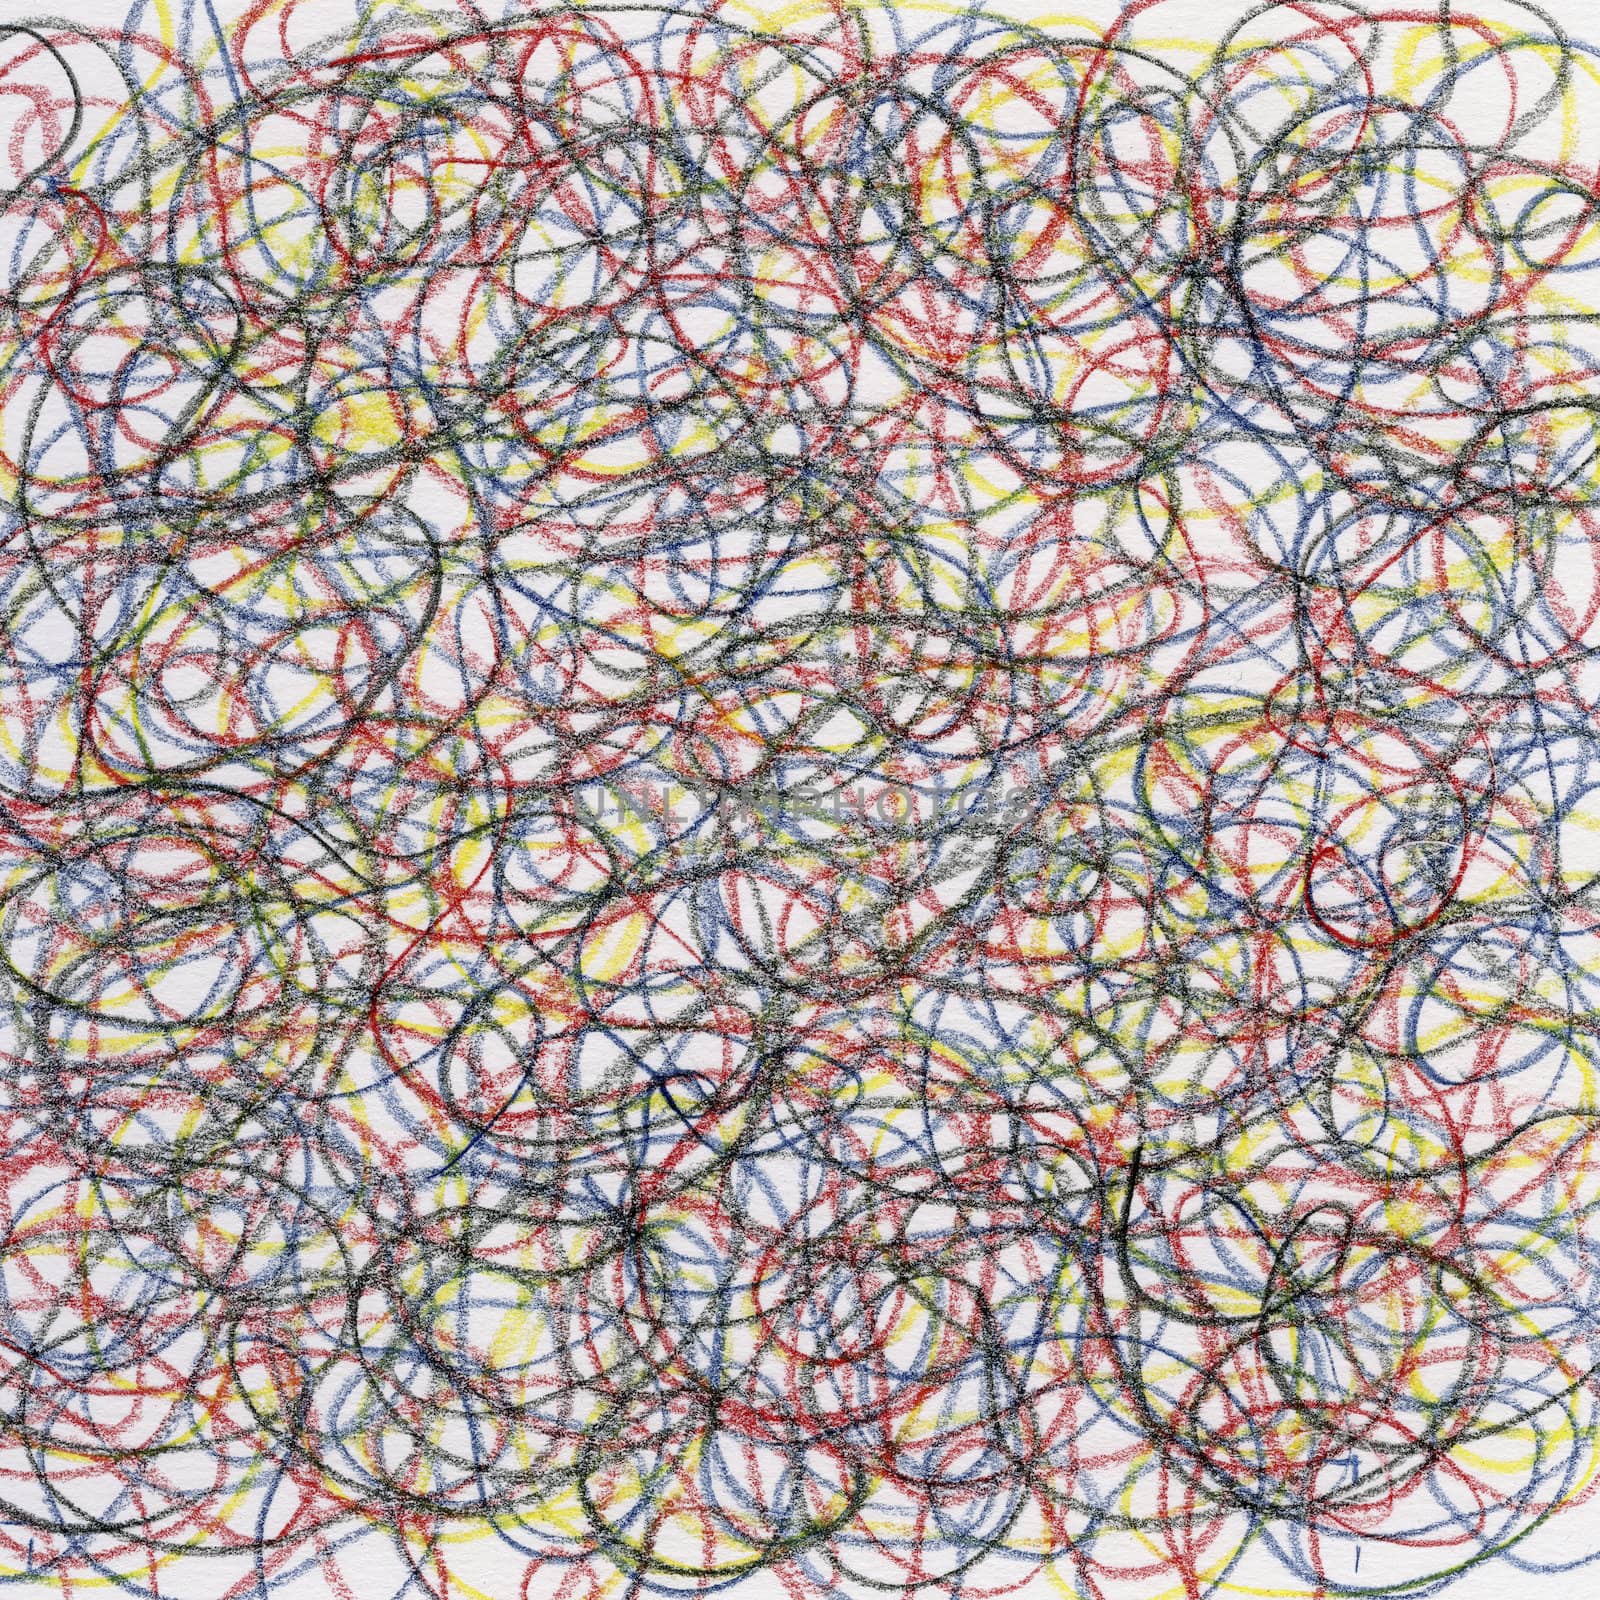 chaotic crayon scribble by PixelsAway